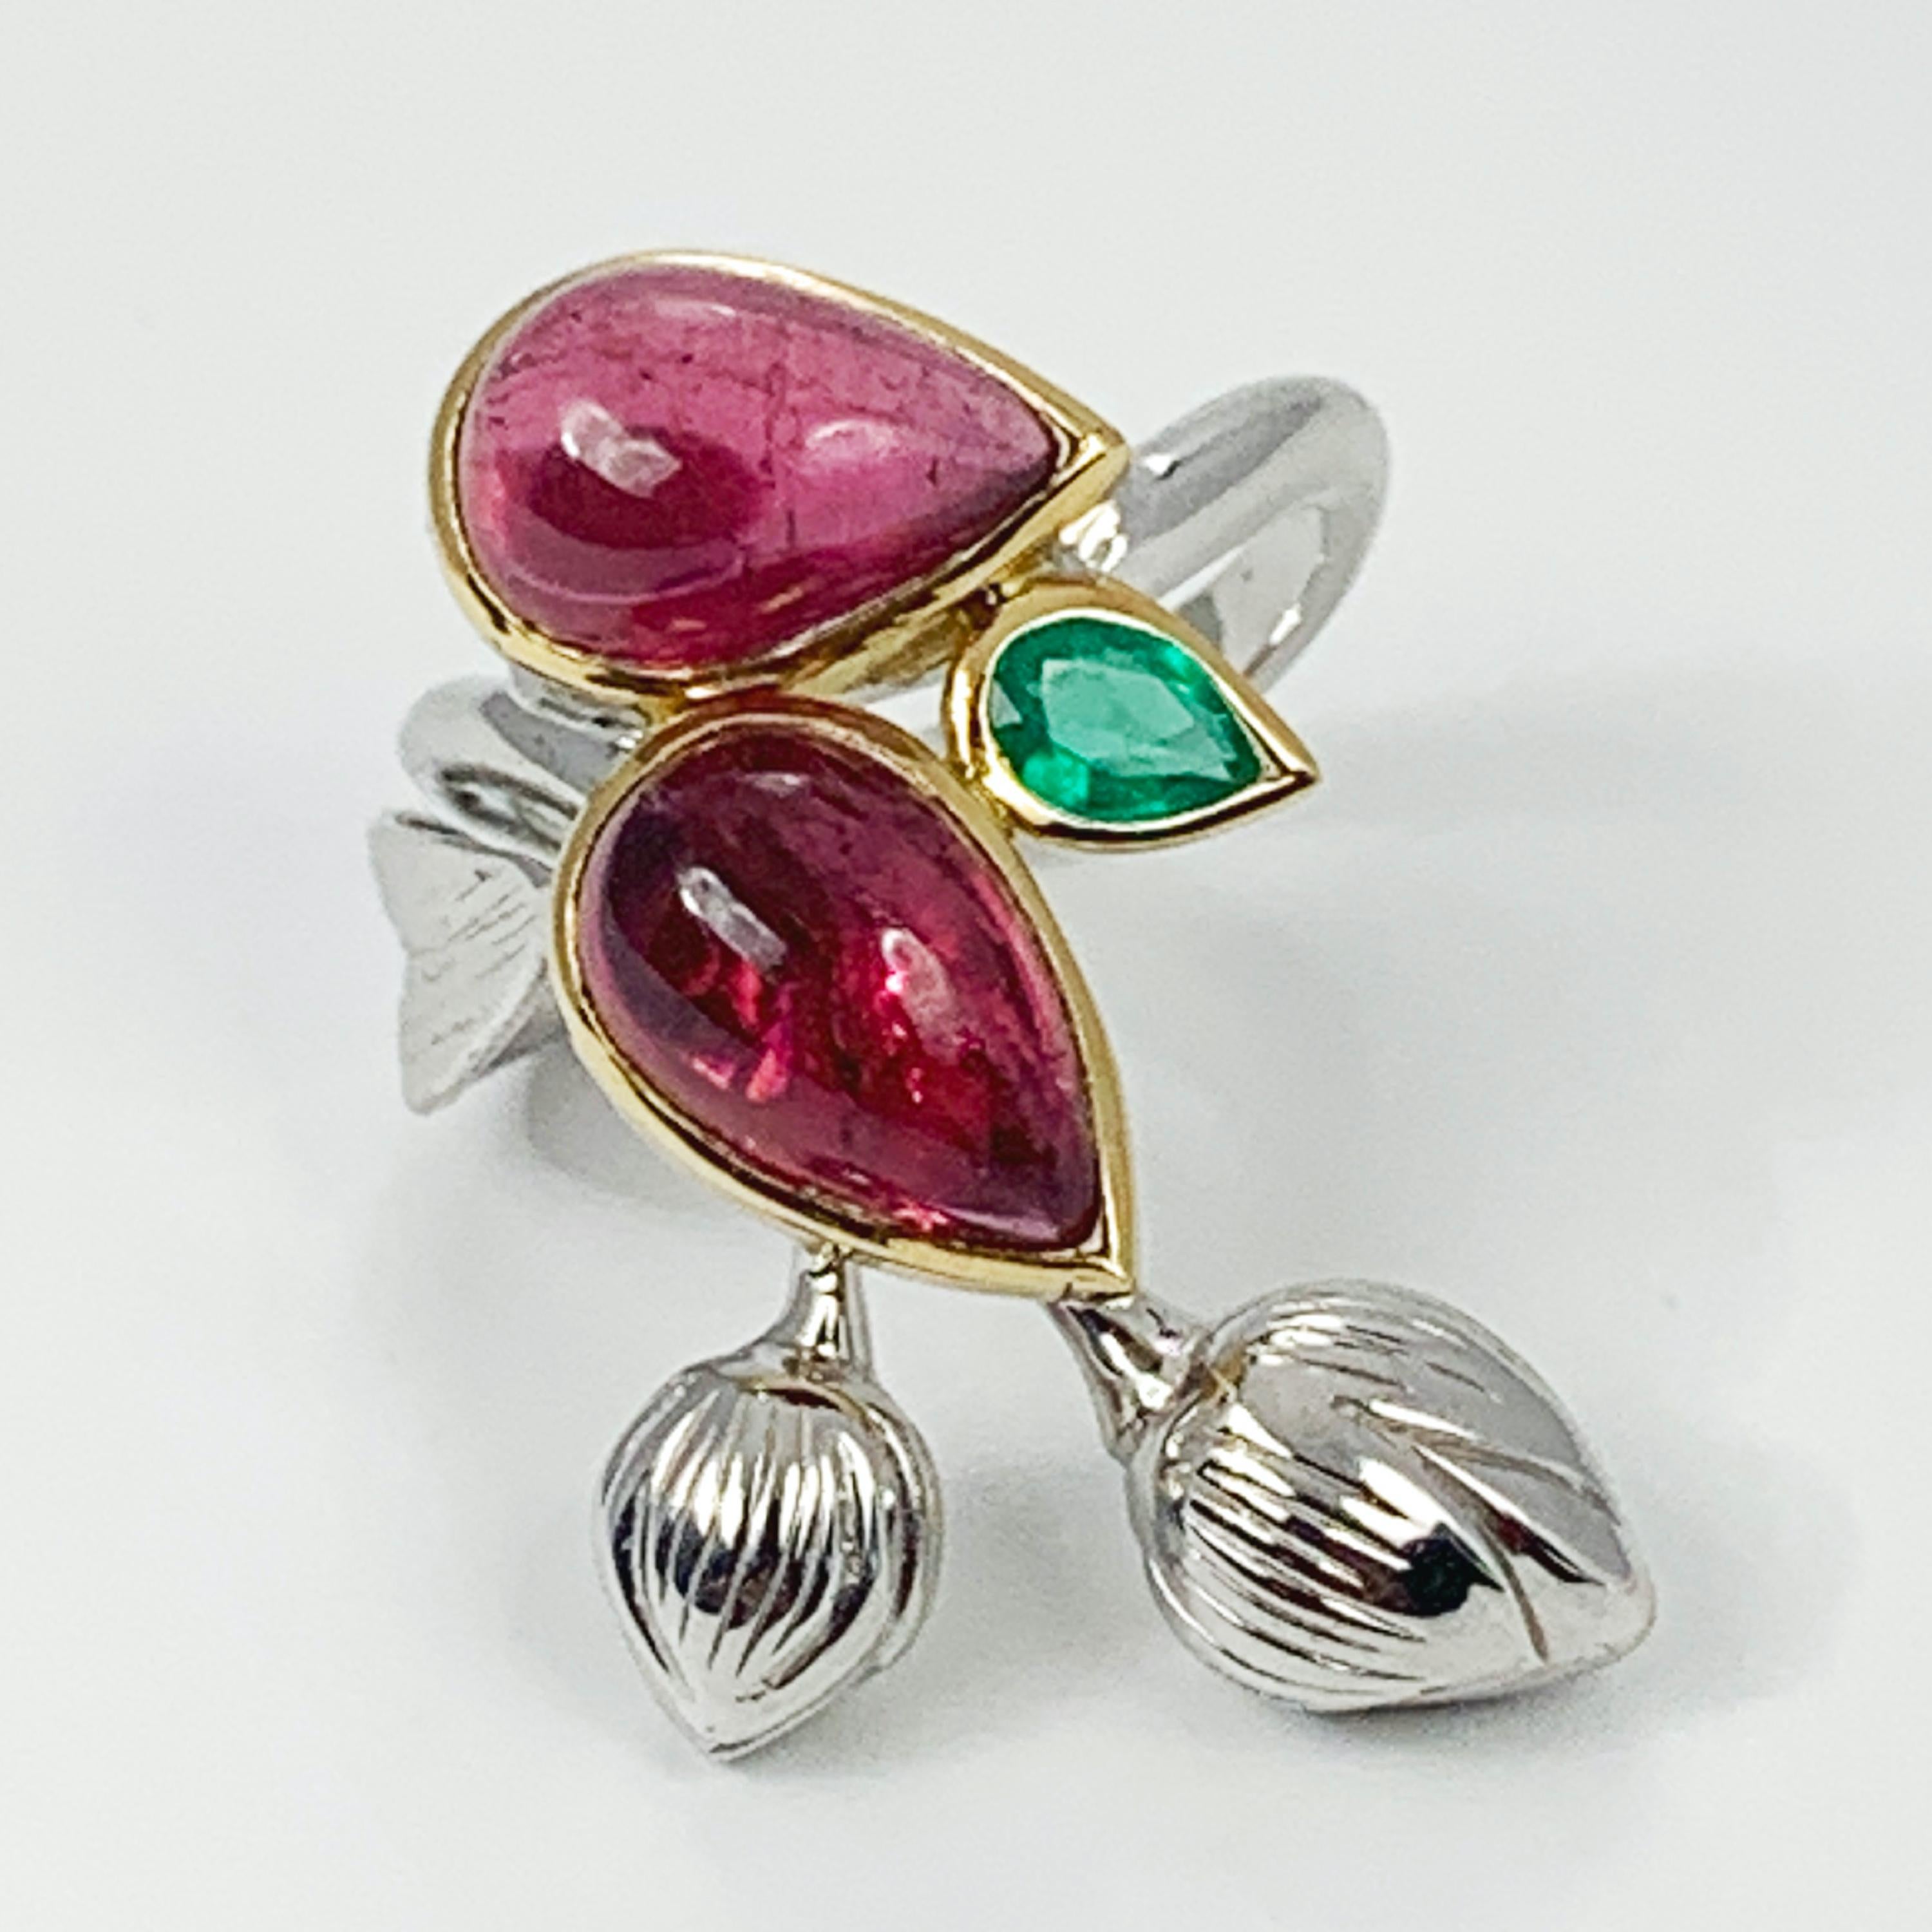 Handcrafted in France in our High Jewelry Paris workshop. Designed by Édéenne, artist and founder of Maison Édéenne, this cheerful ring is made of 18K white and yellow gold featuring two cabochon-cut drop-shaped rubellites (red tourmalines)